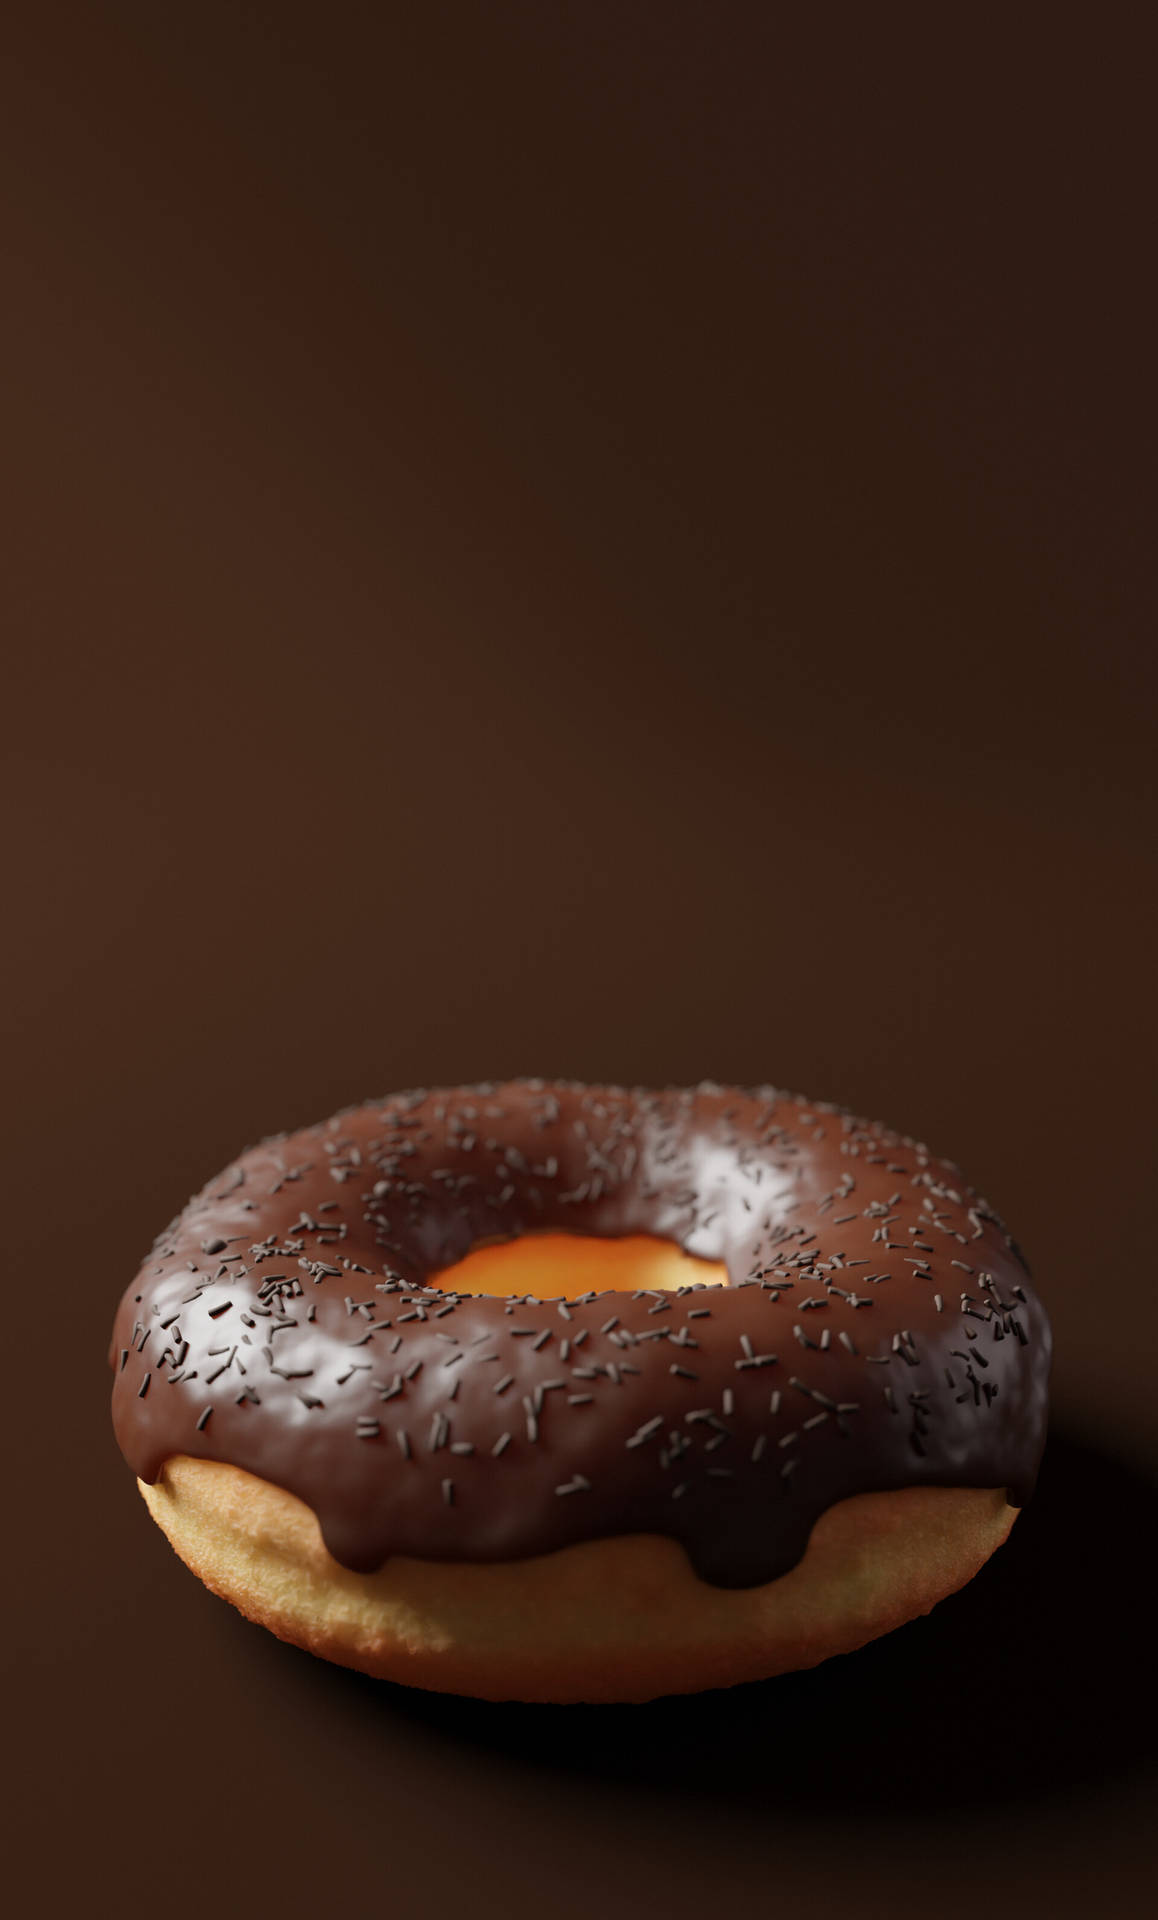 Chocolate Donut With Sprinkles Background